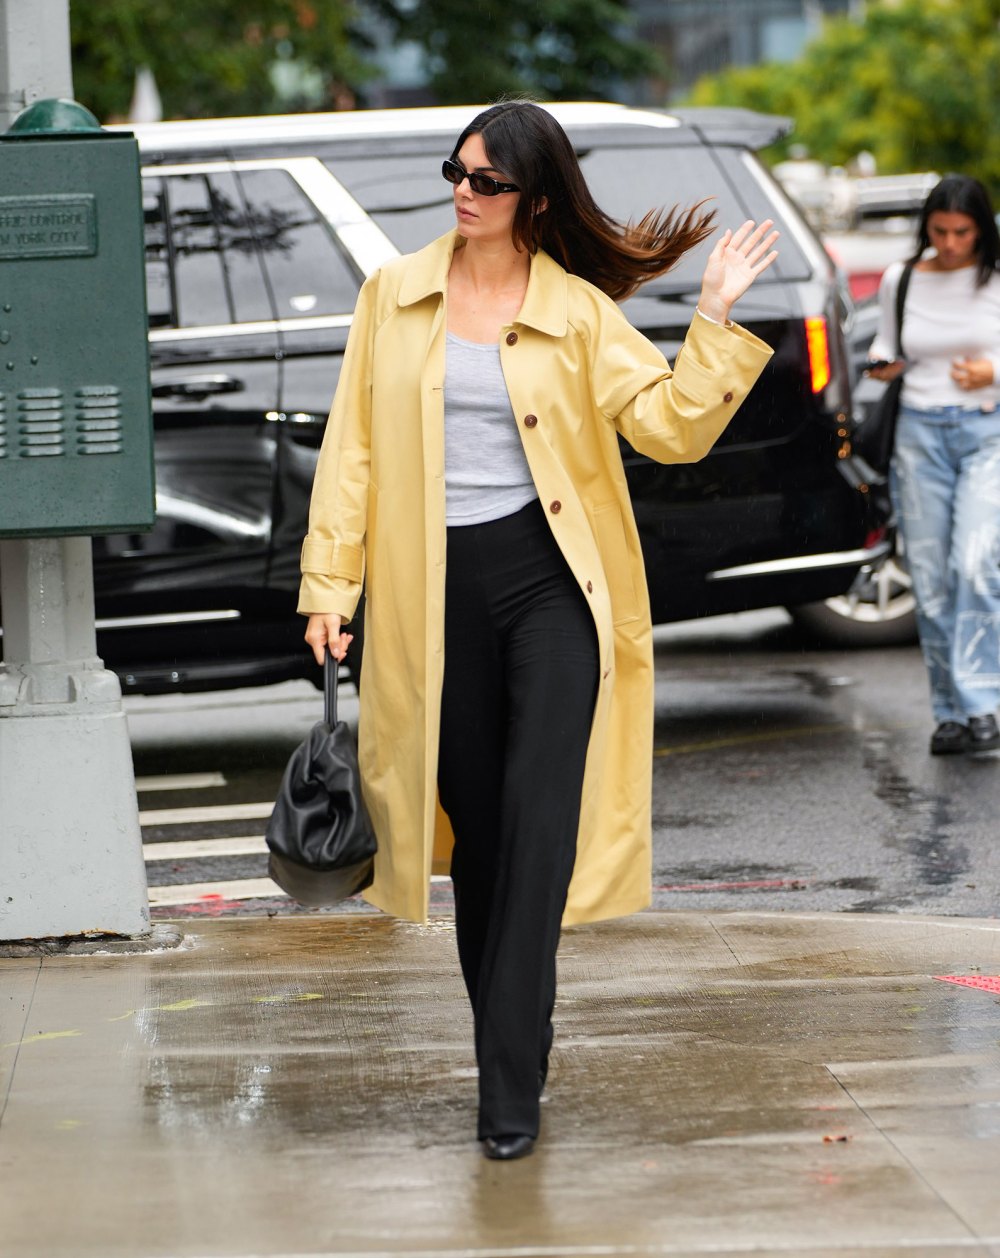 Kendall Jenner Brings Sunshine to a Rainy Day in Chic Yellow Coat